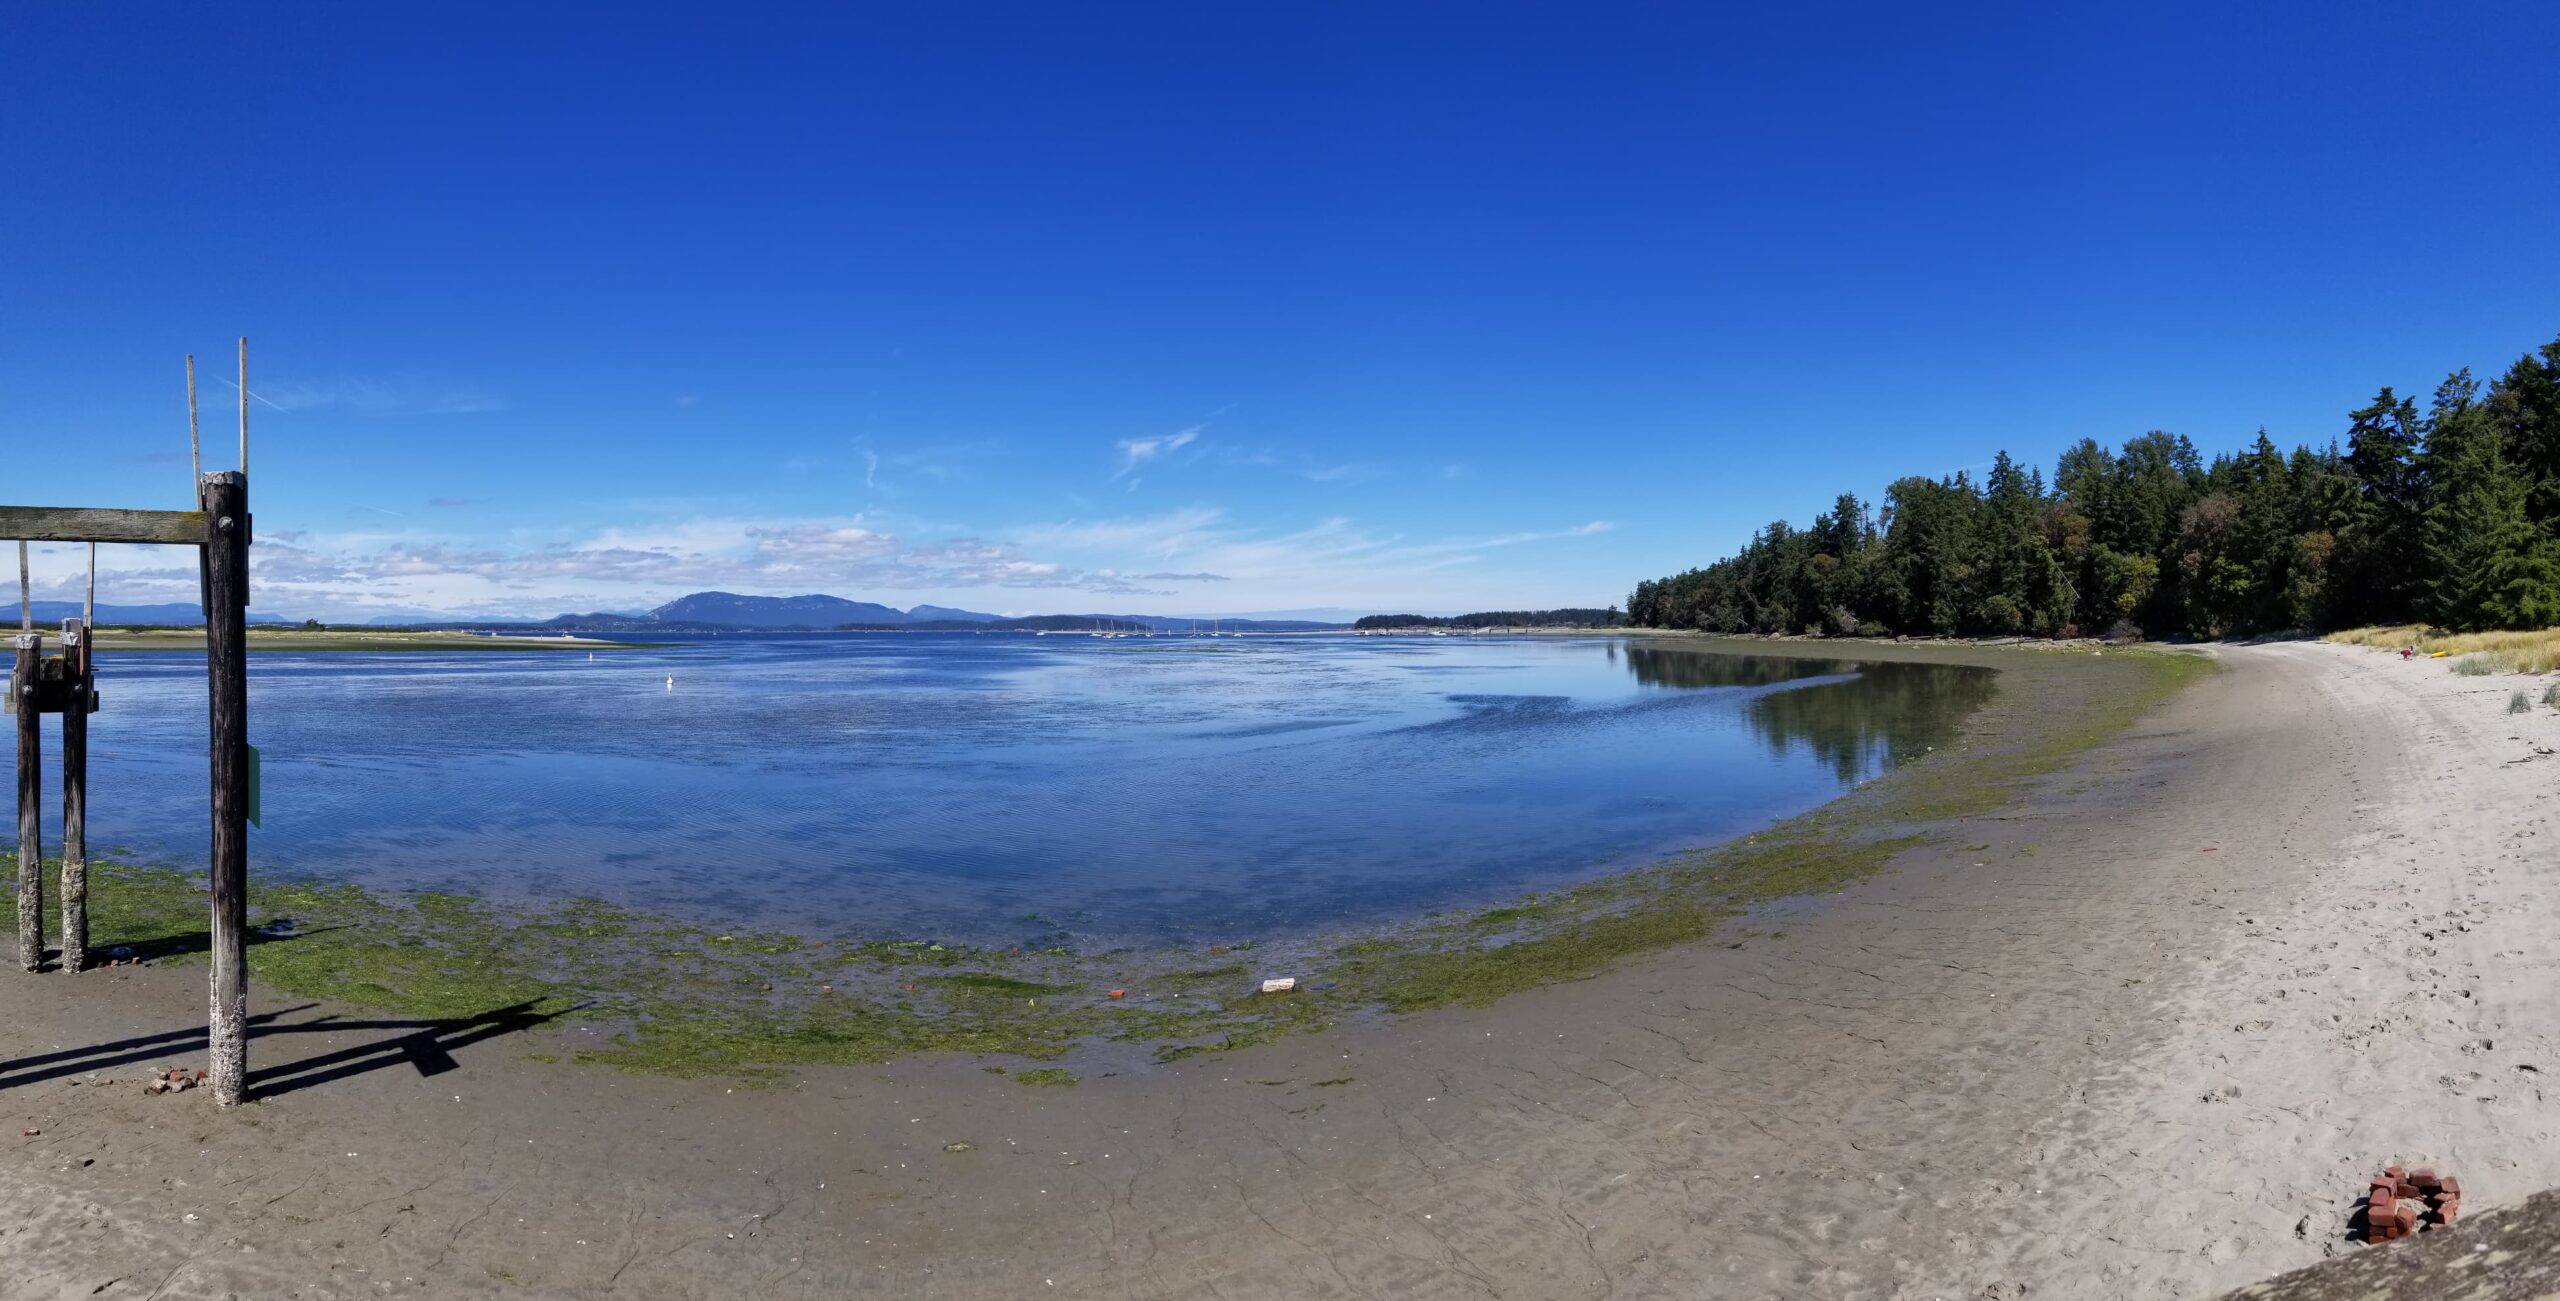 THE UNEXPECTED ROMANCE OF A SIDNEY ISLAND DAY TRIP!